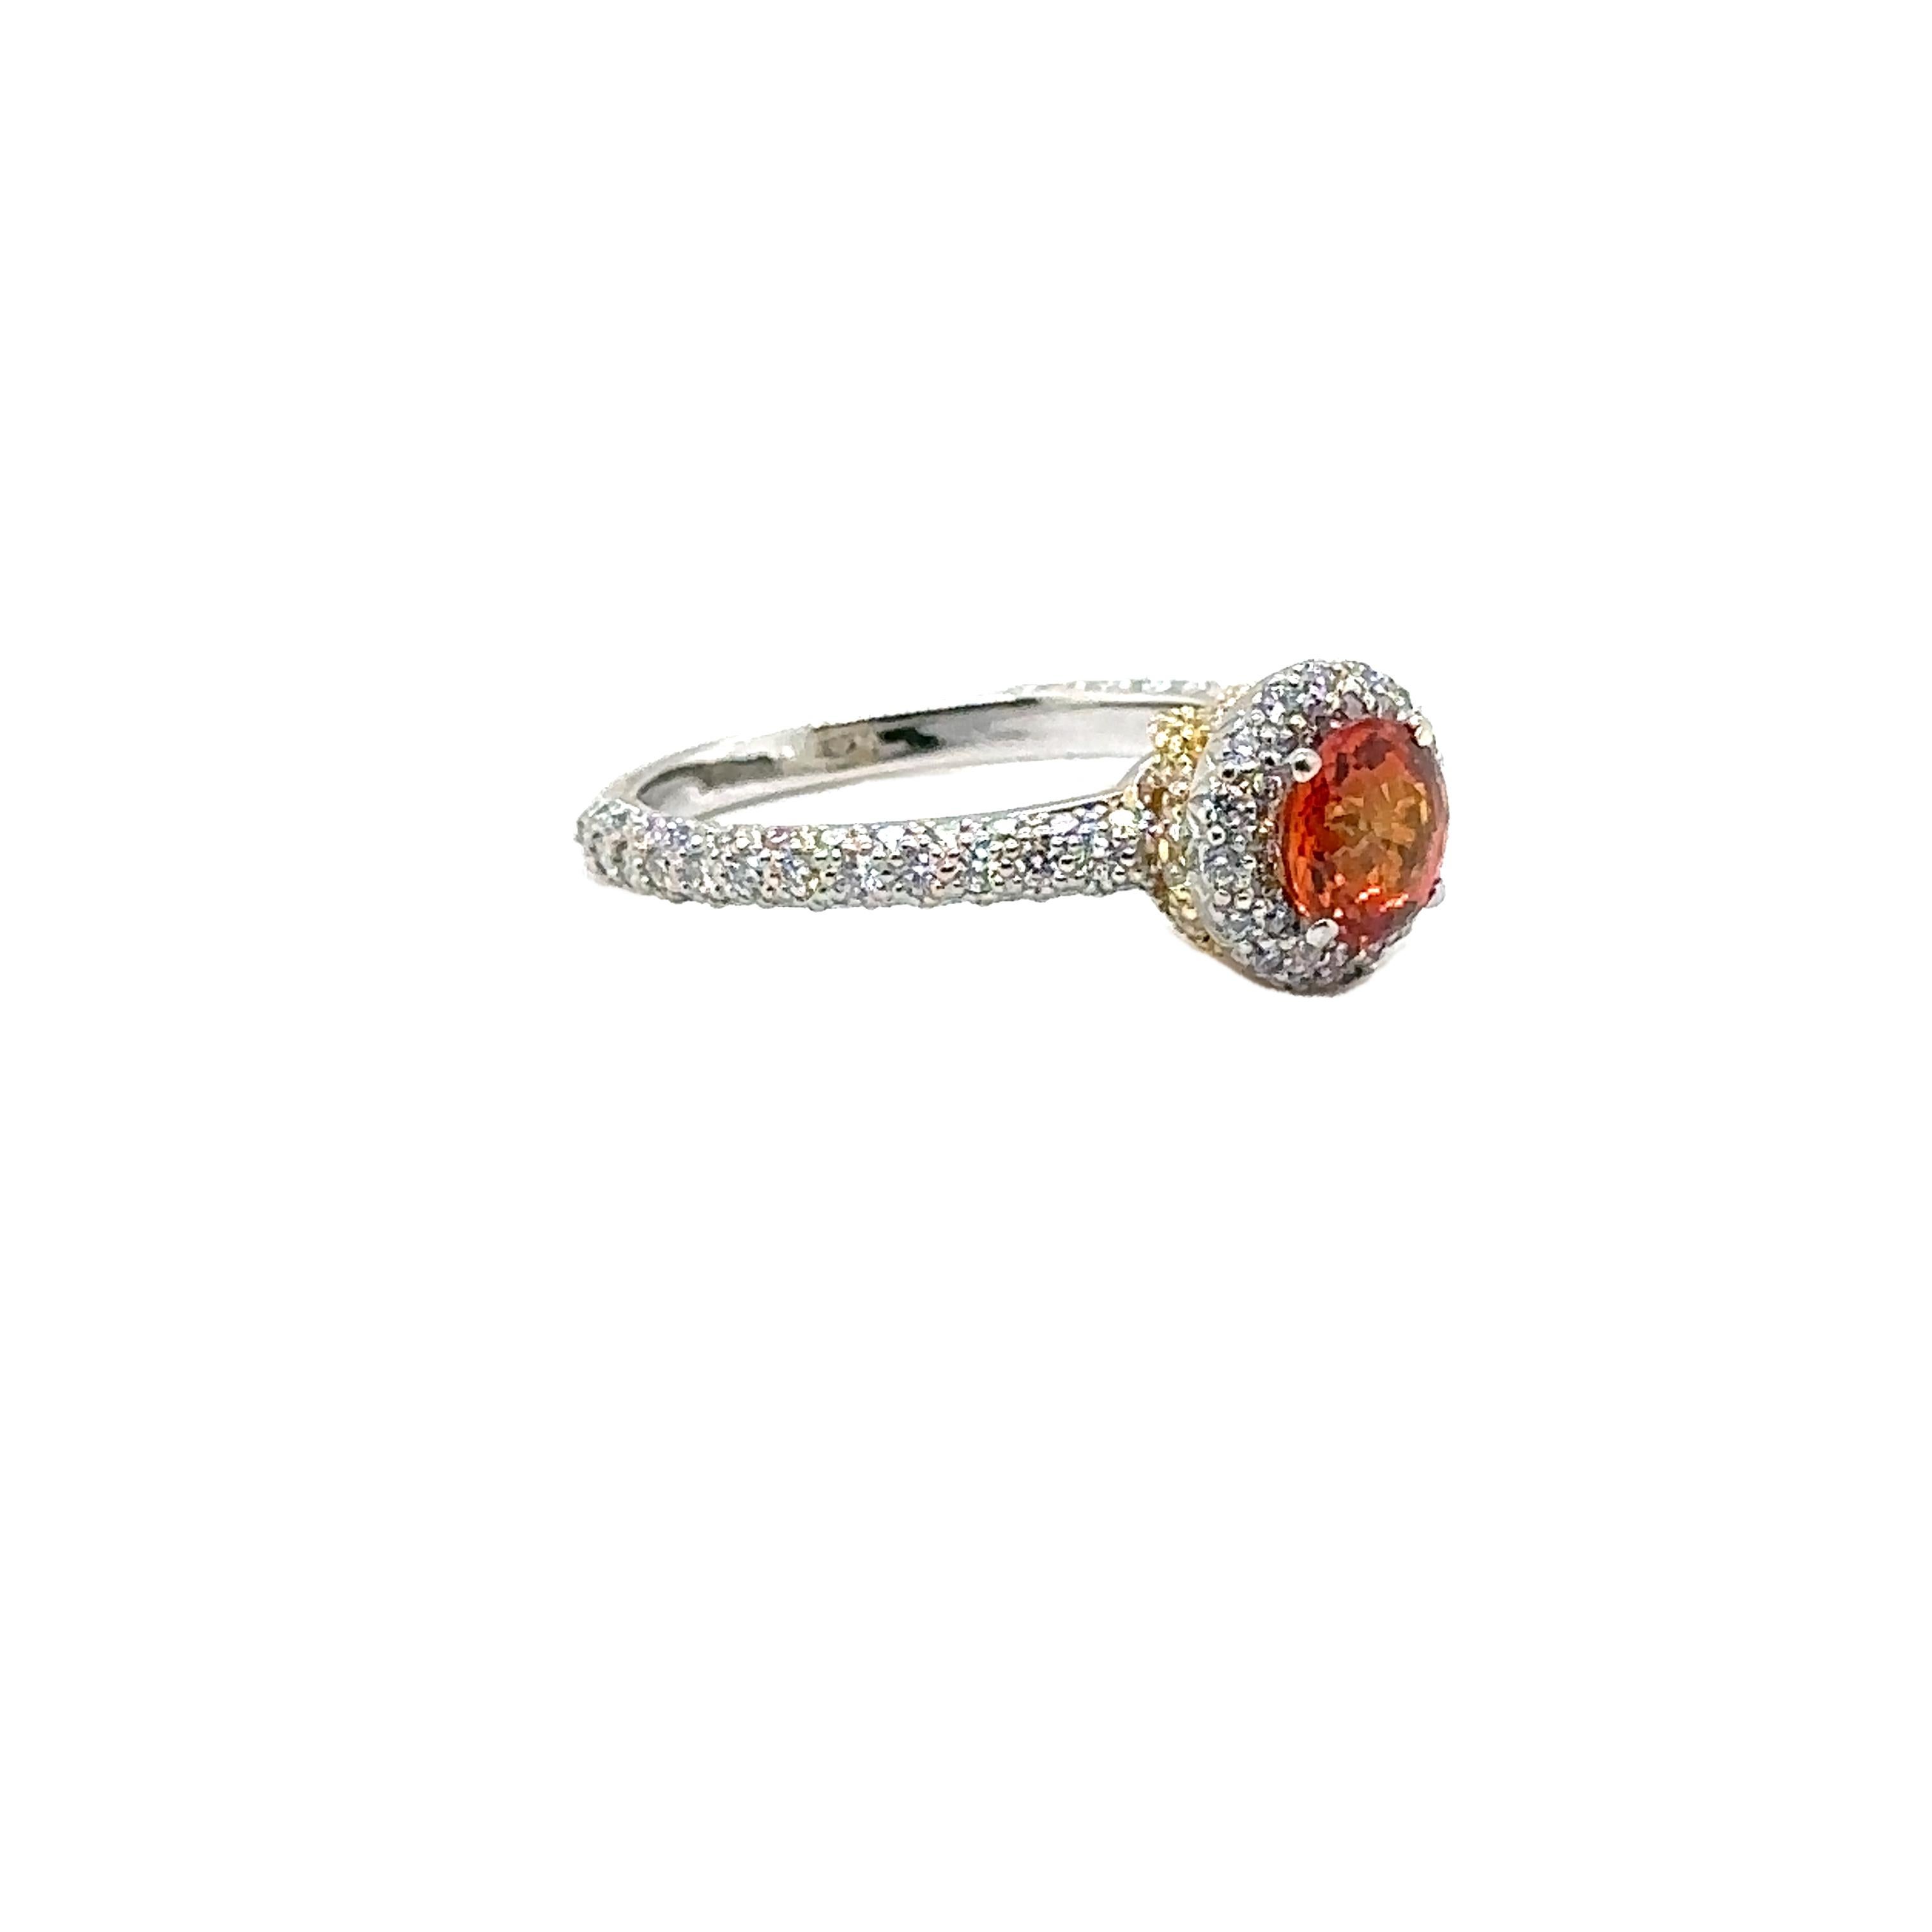 R-ETERNAL - ETERNAL HEARTS RING with CENTER ROUND ORANGE SAPPHIRE & DIAMONDS  In New Condition For Sale In New York, NY